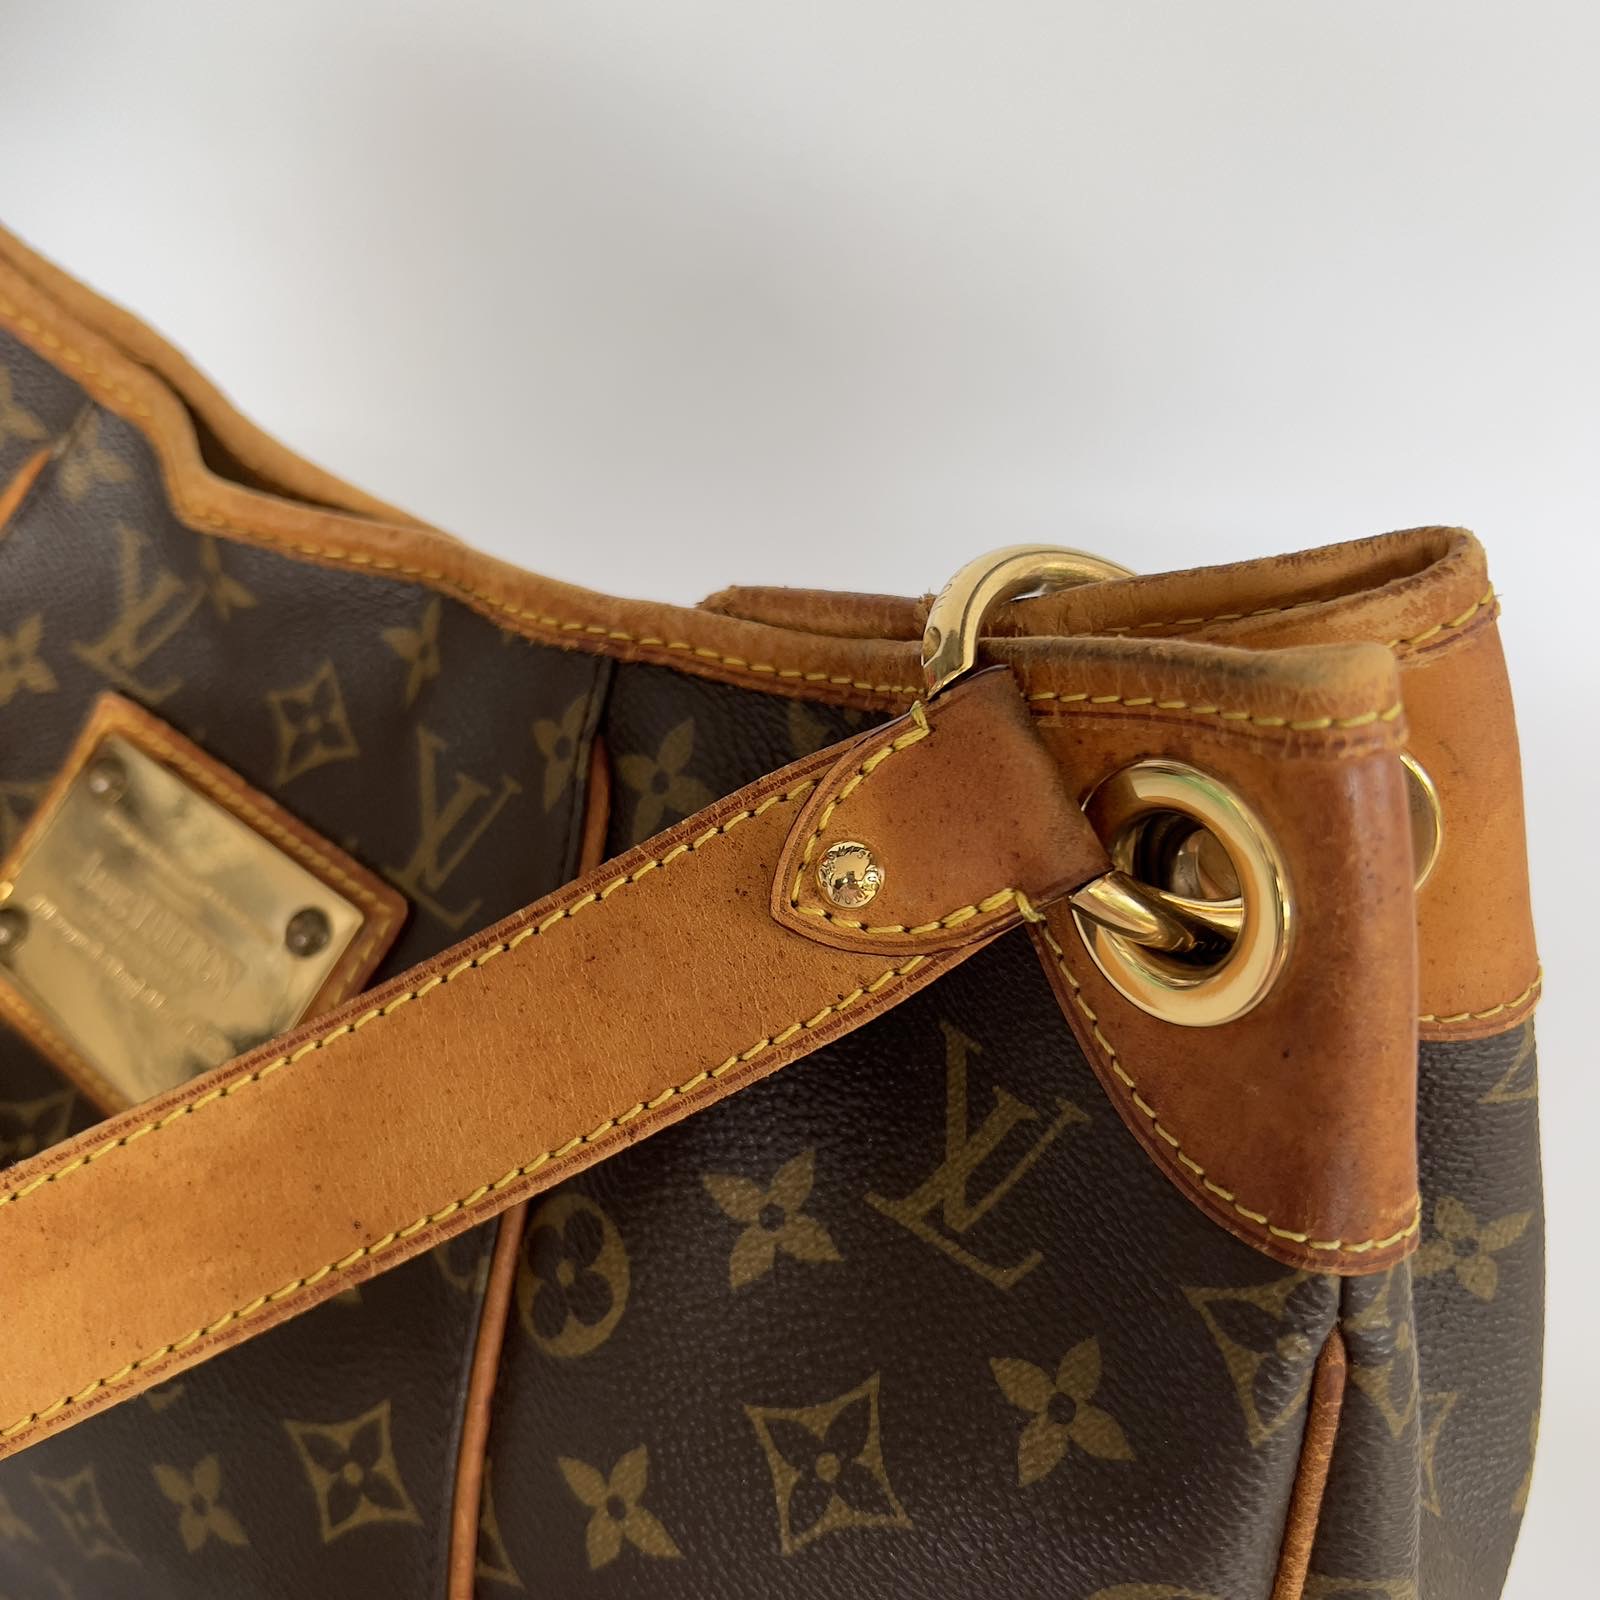 Louis Vuitton Monogram Canvas Delightful PM. Made in France. No inclusions  ❤️